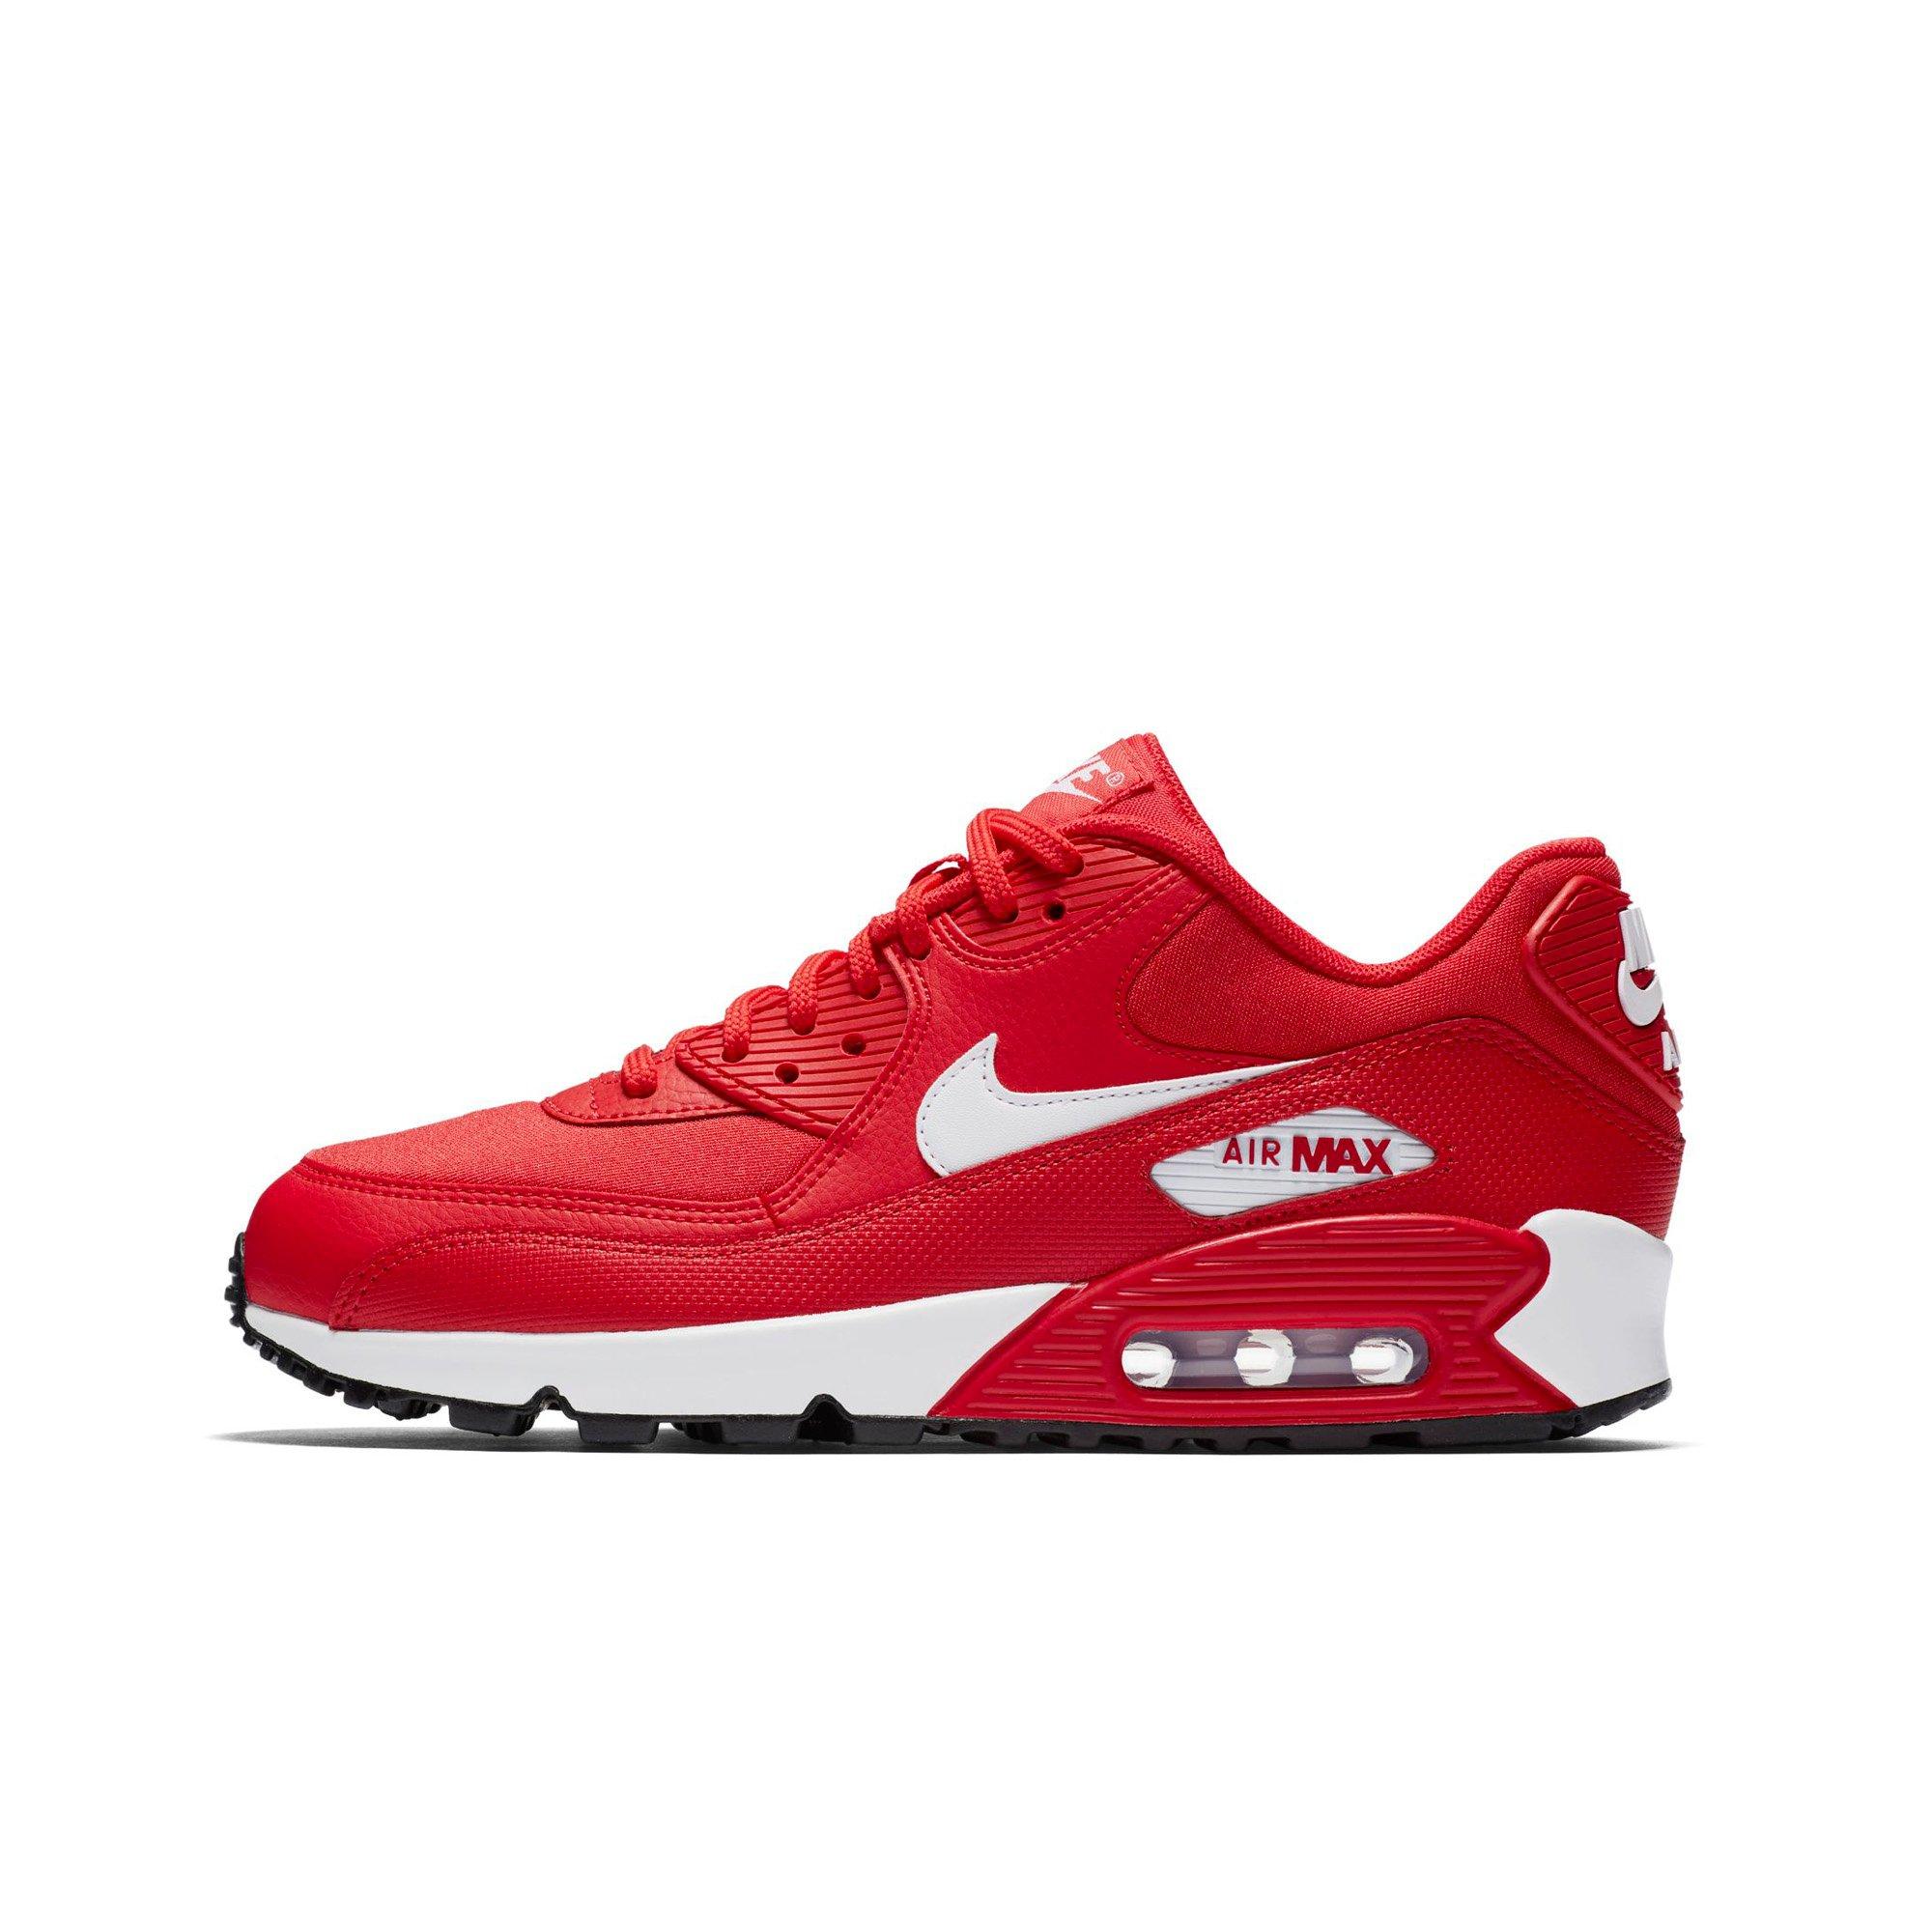 nike red shoes women's air max